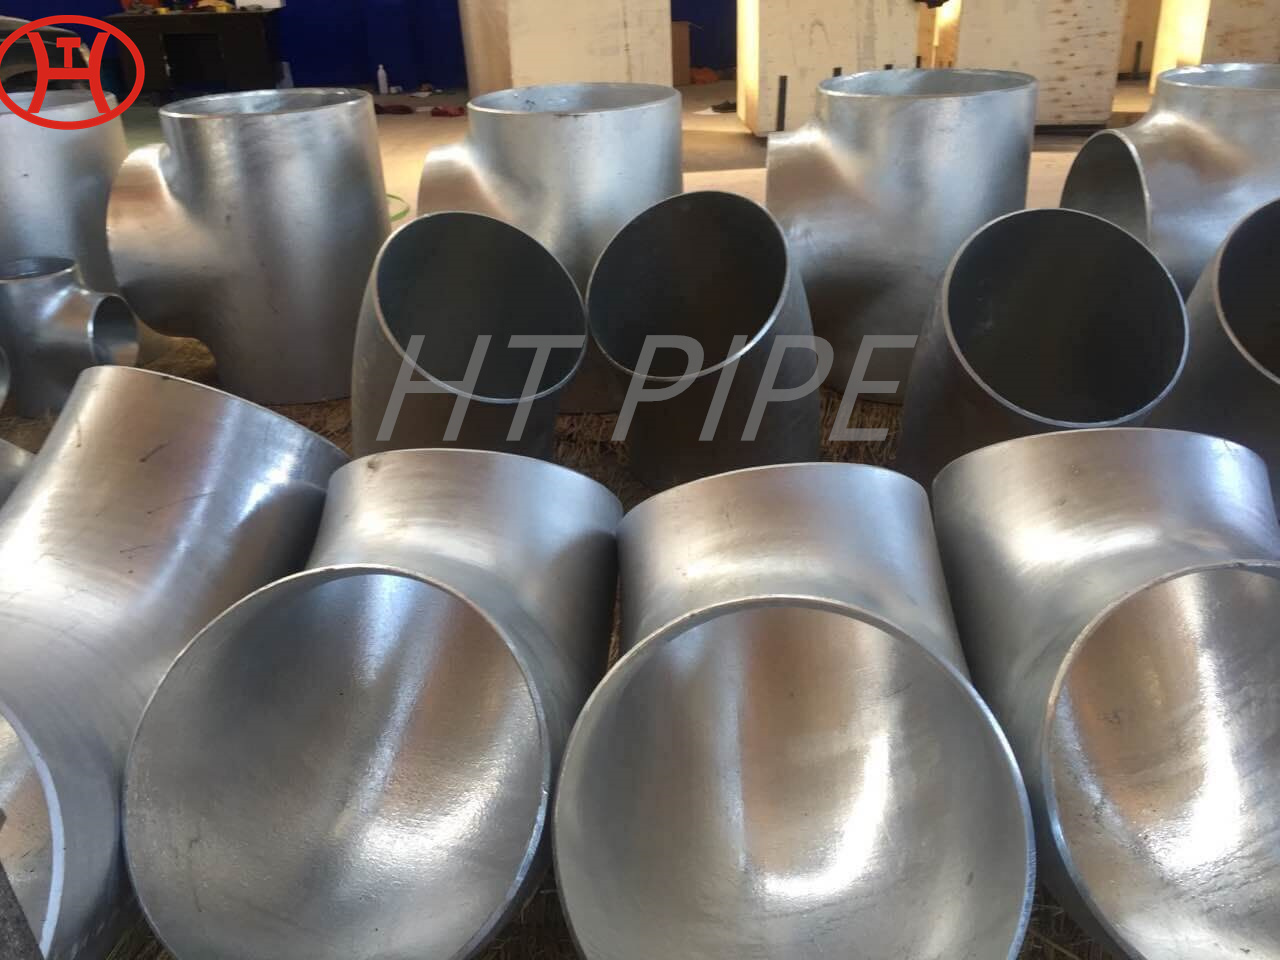 stainless steel 30 deg equal elbow pipe fitting elbows